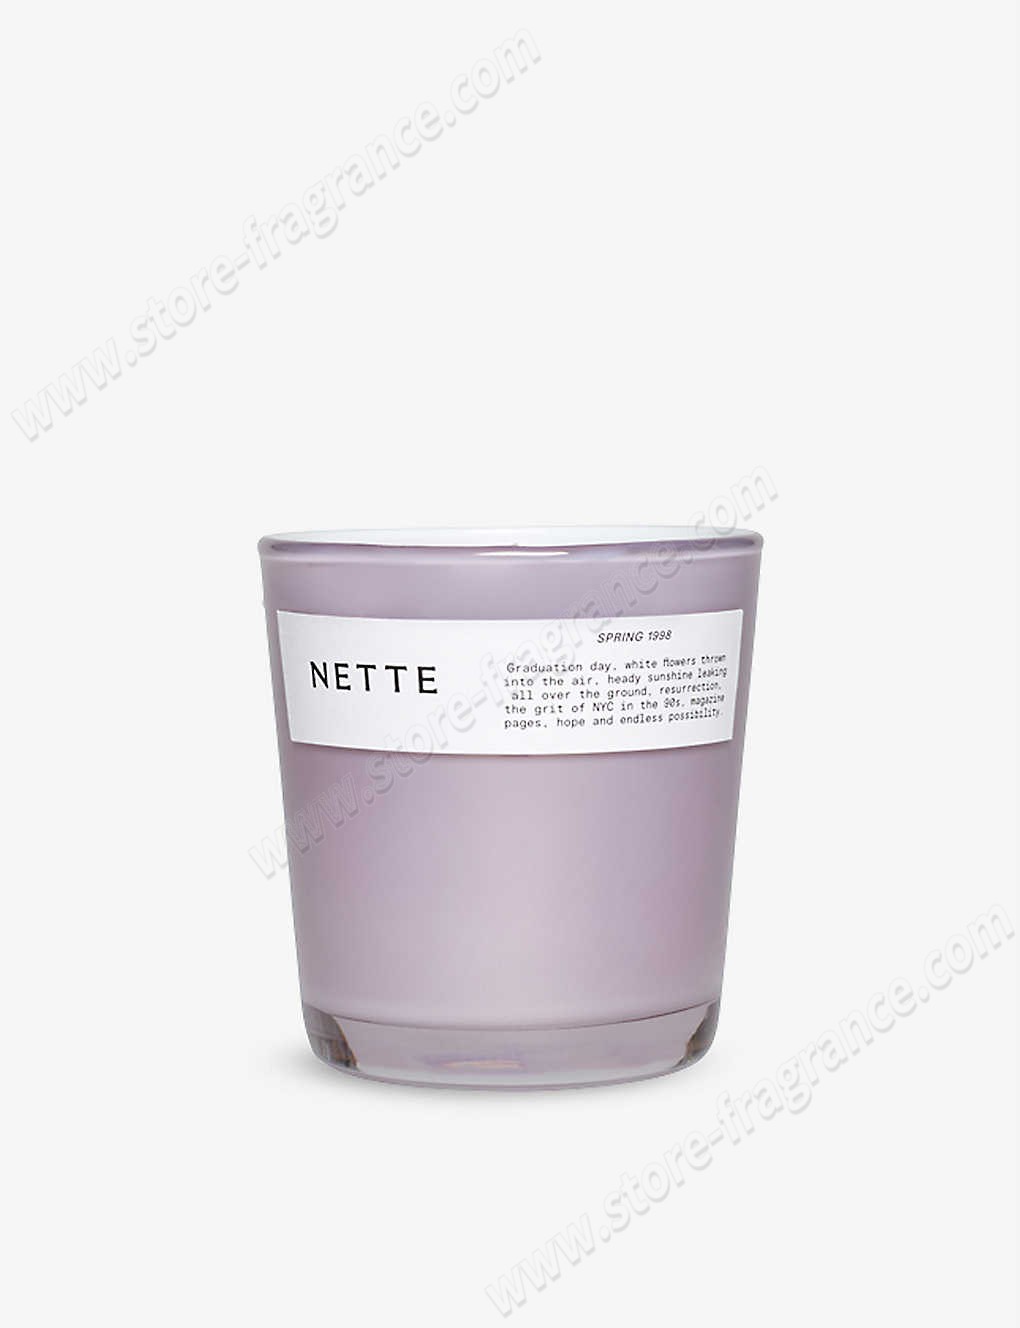 NETTE/Spring 1998 scented candle 20.6oz ✿ Discount Store - NETTE/Spring 1998 scented candle 20.6oz ✿ Discount Store